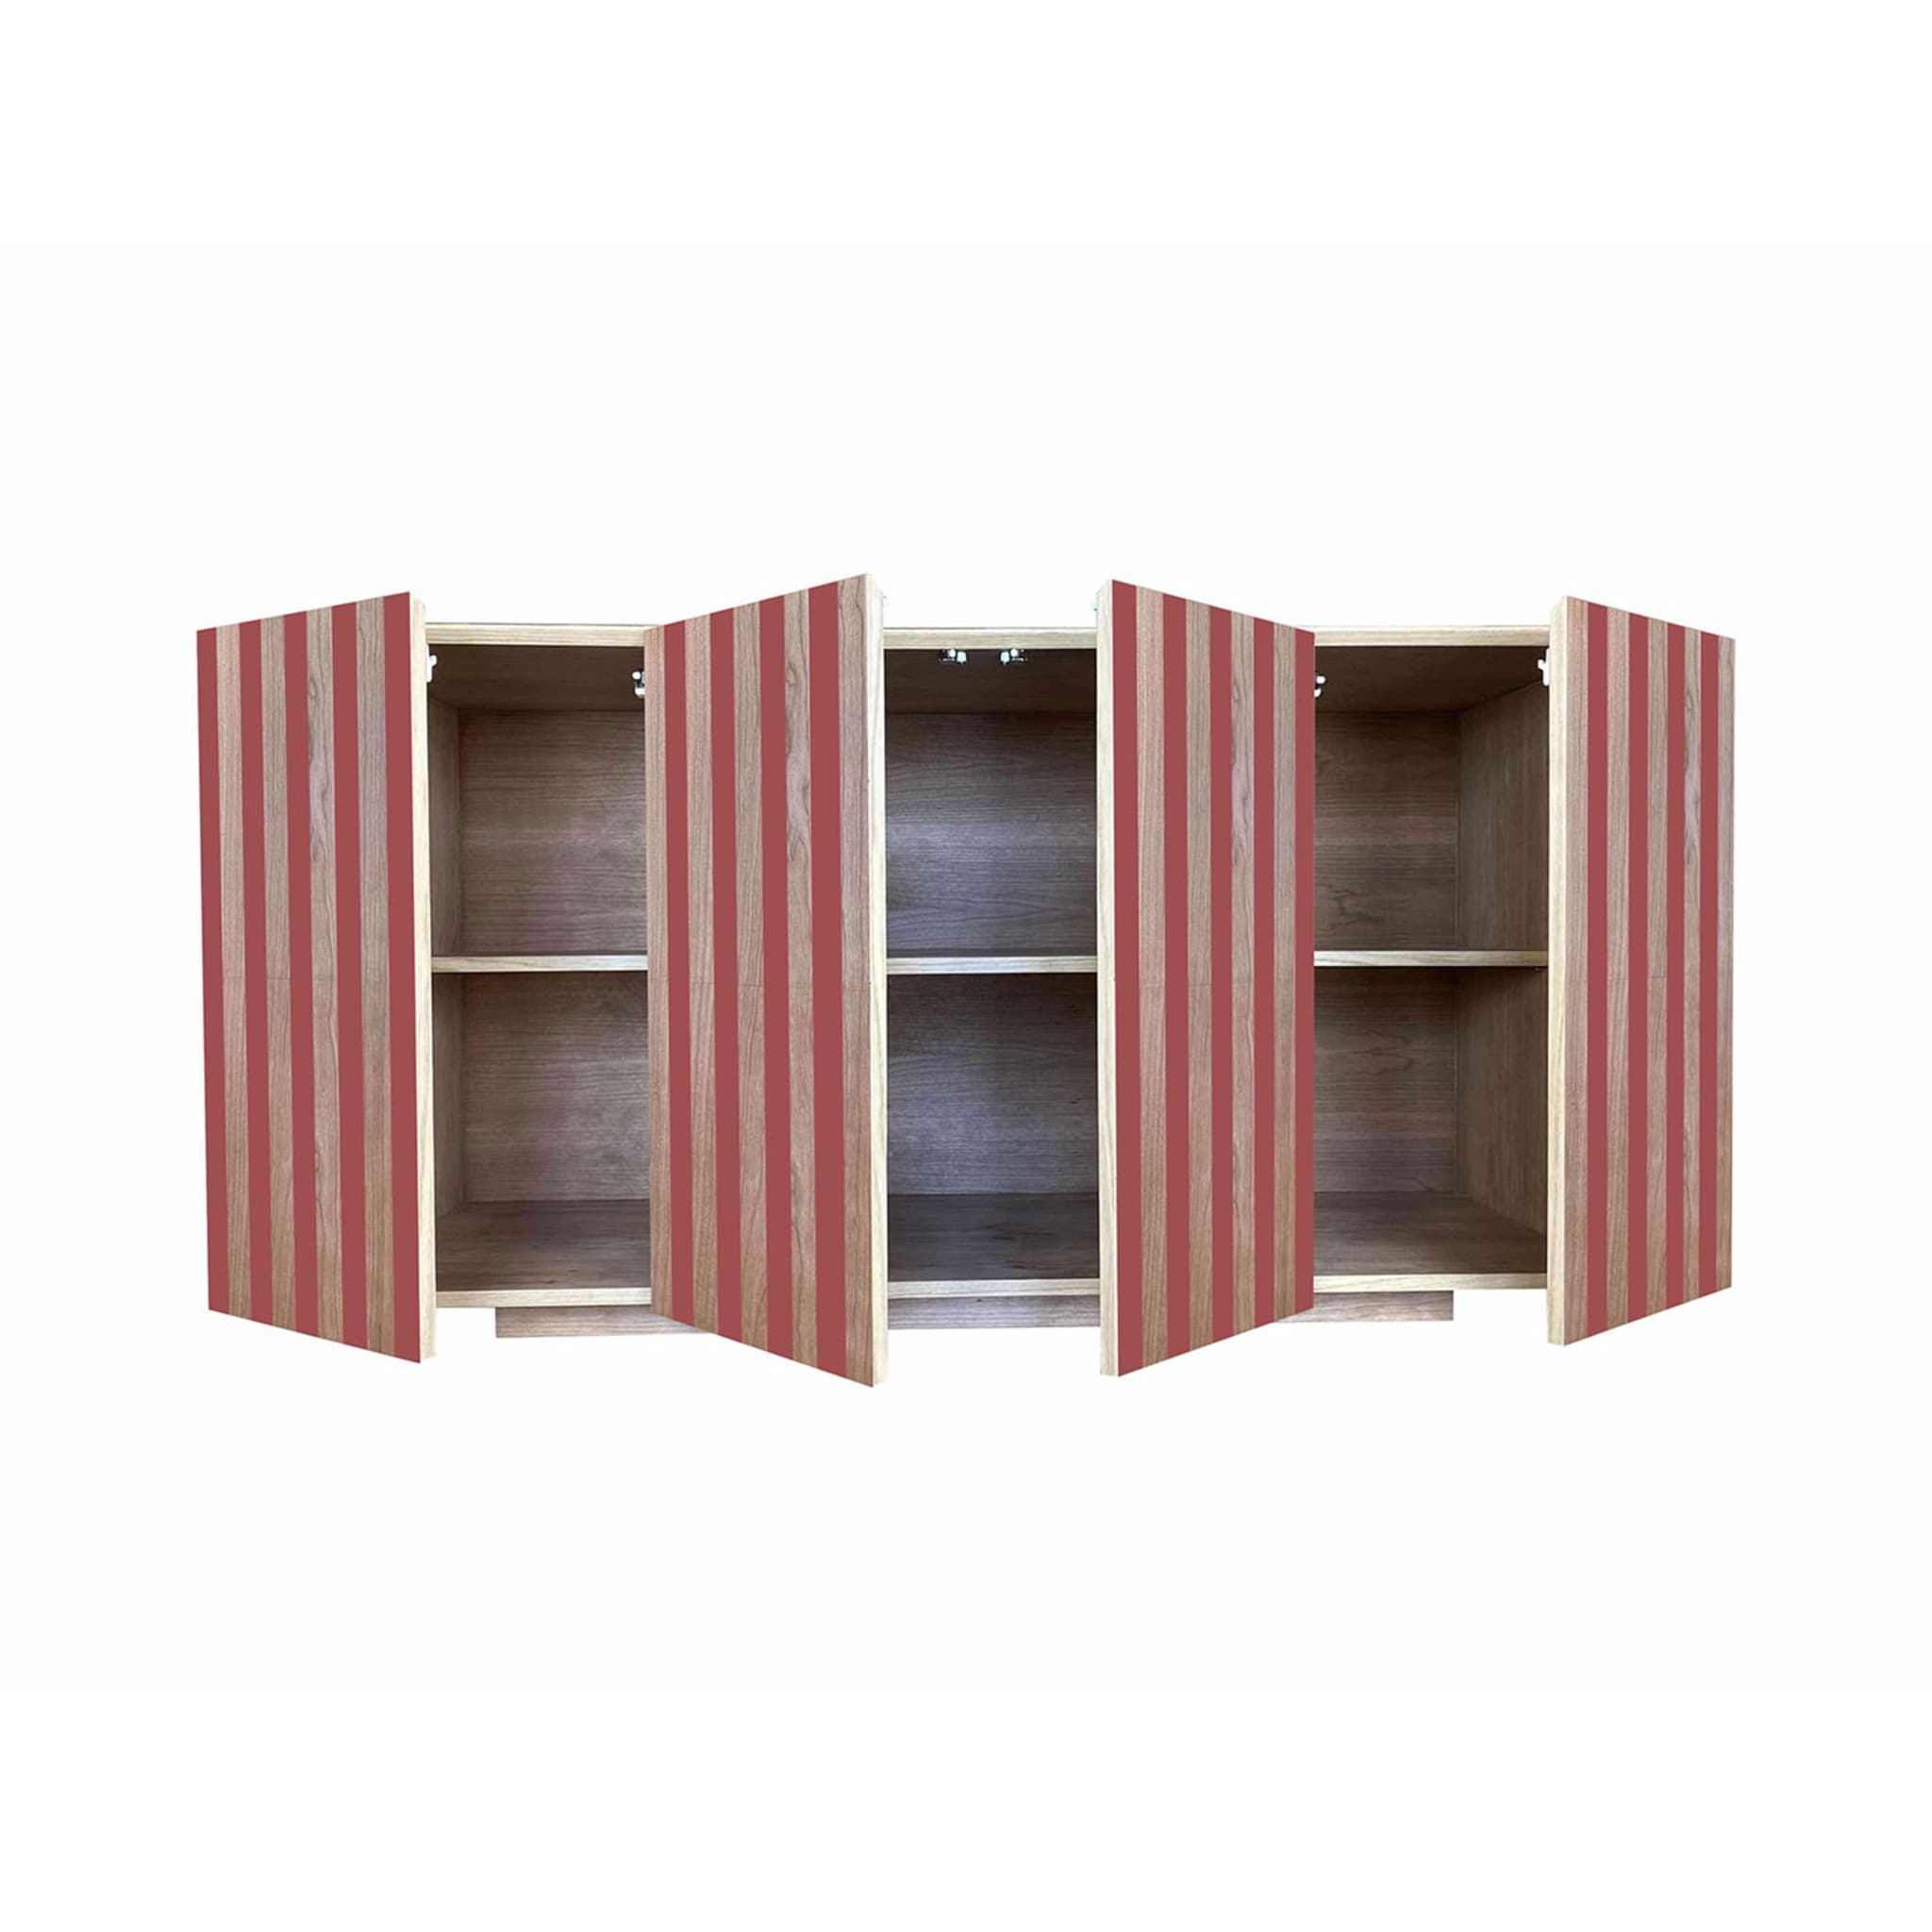 Md6 4-Door Striped Sideboard by Meccani Studio - Alternative view 4